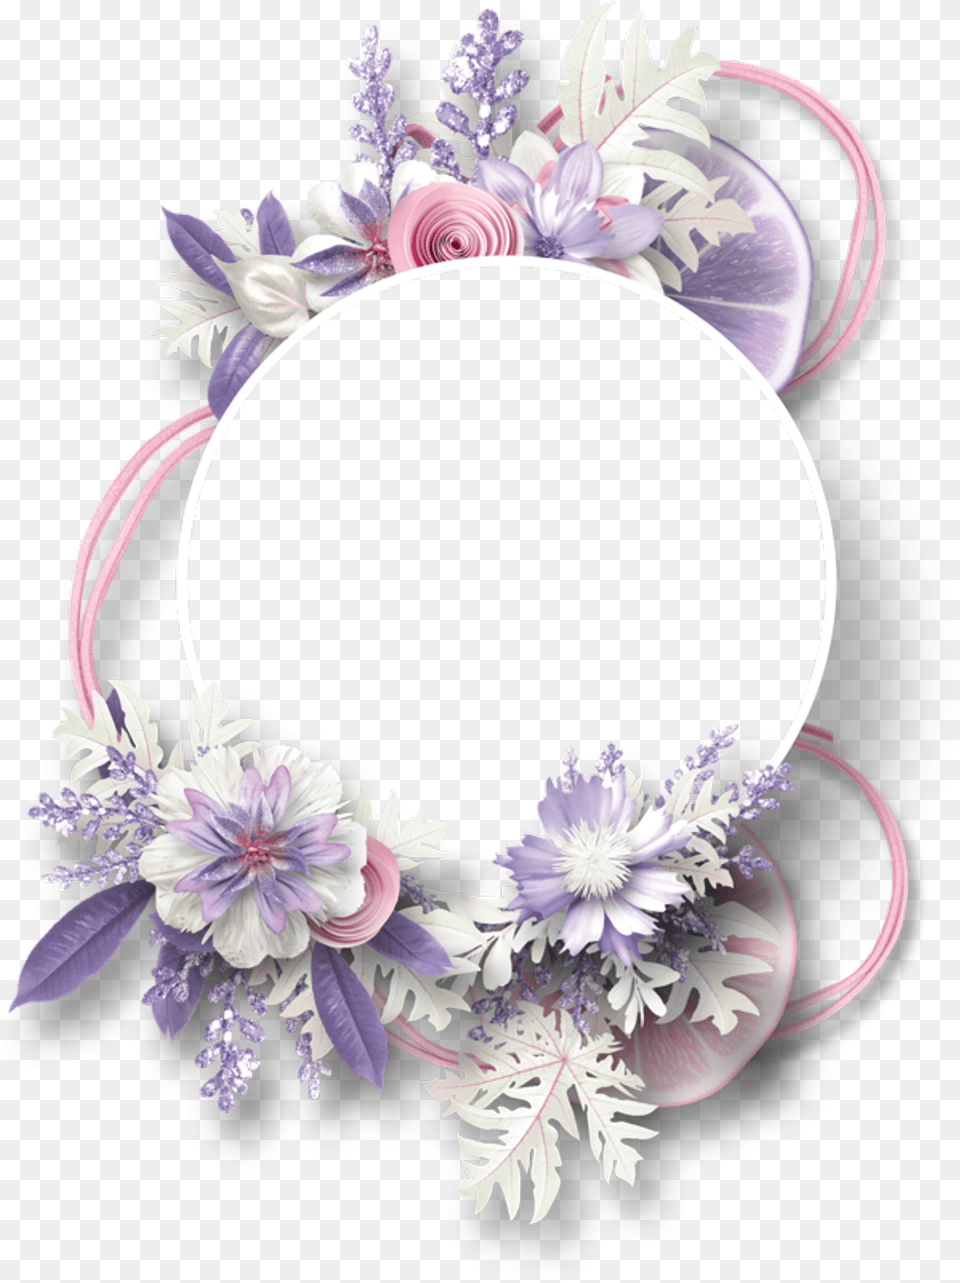 Download Decorative Picture Scrapbooking Frame Digital Flower Floral Purple, Accessories, Plant, Jewelry Free Png